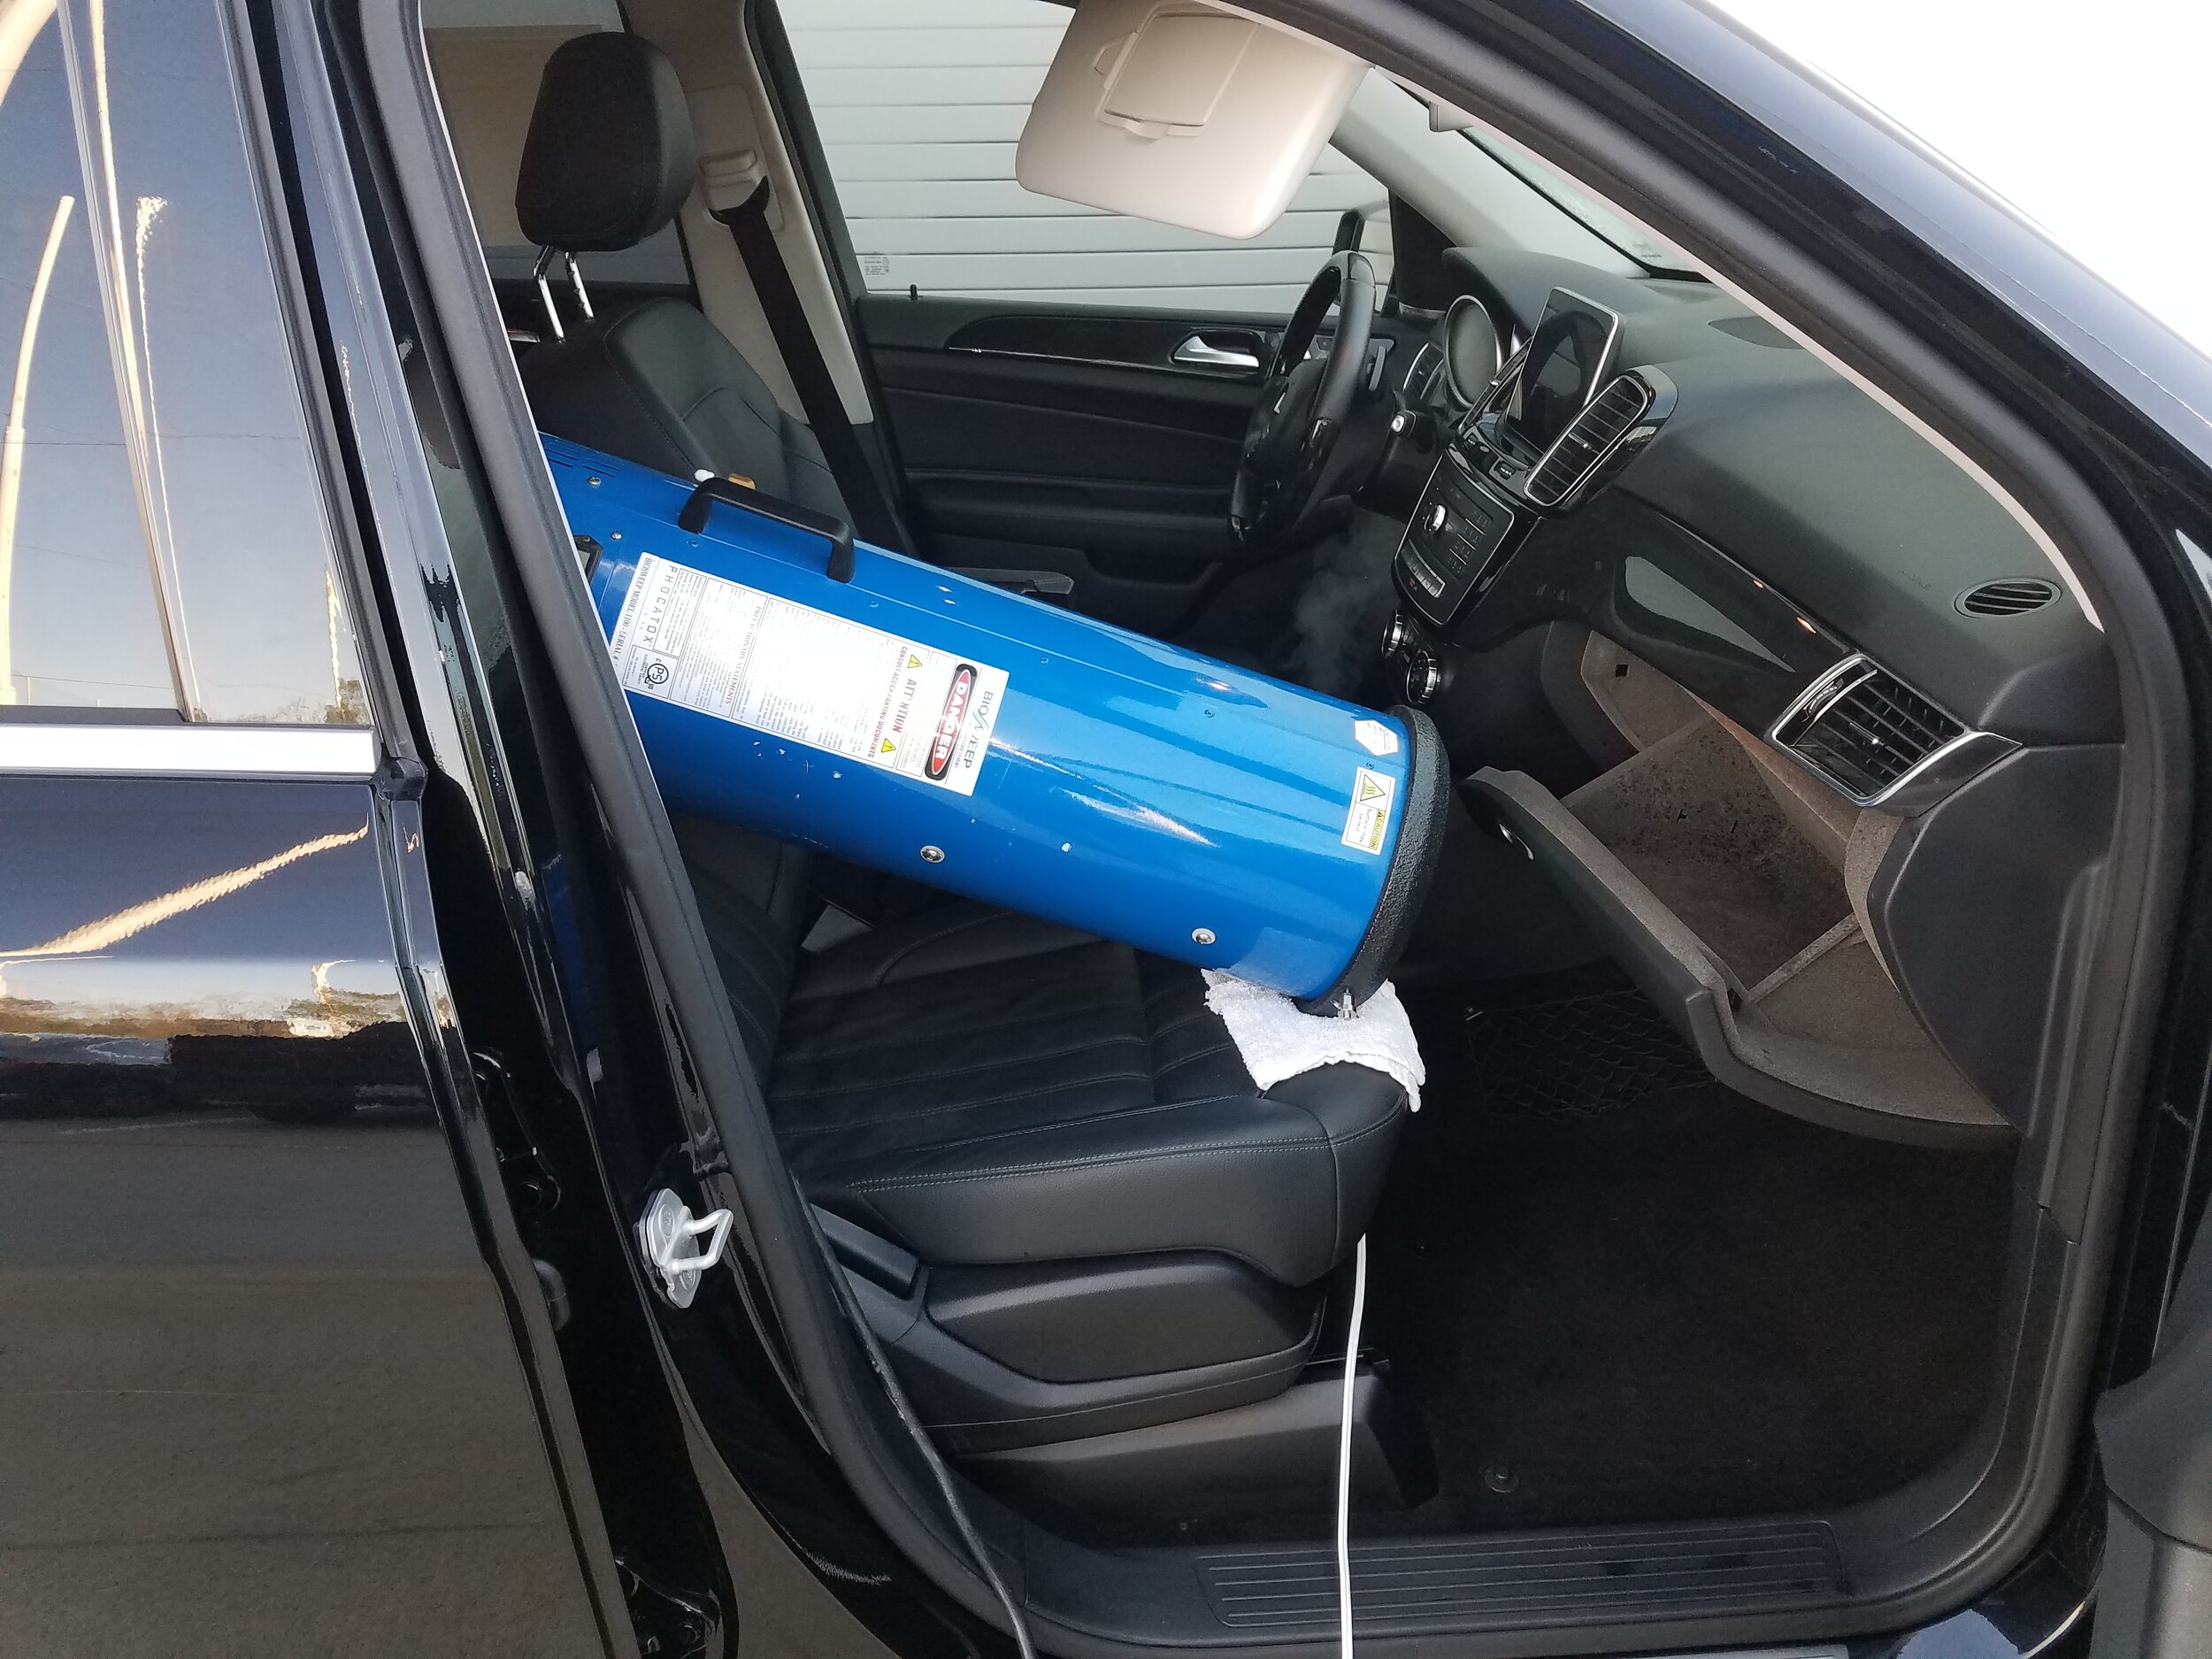 Vehicle Odor Removal Services